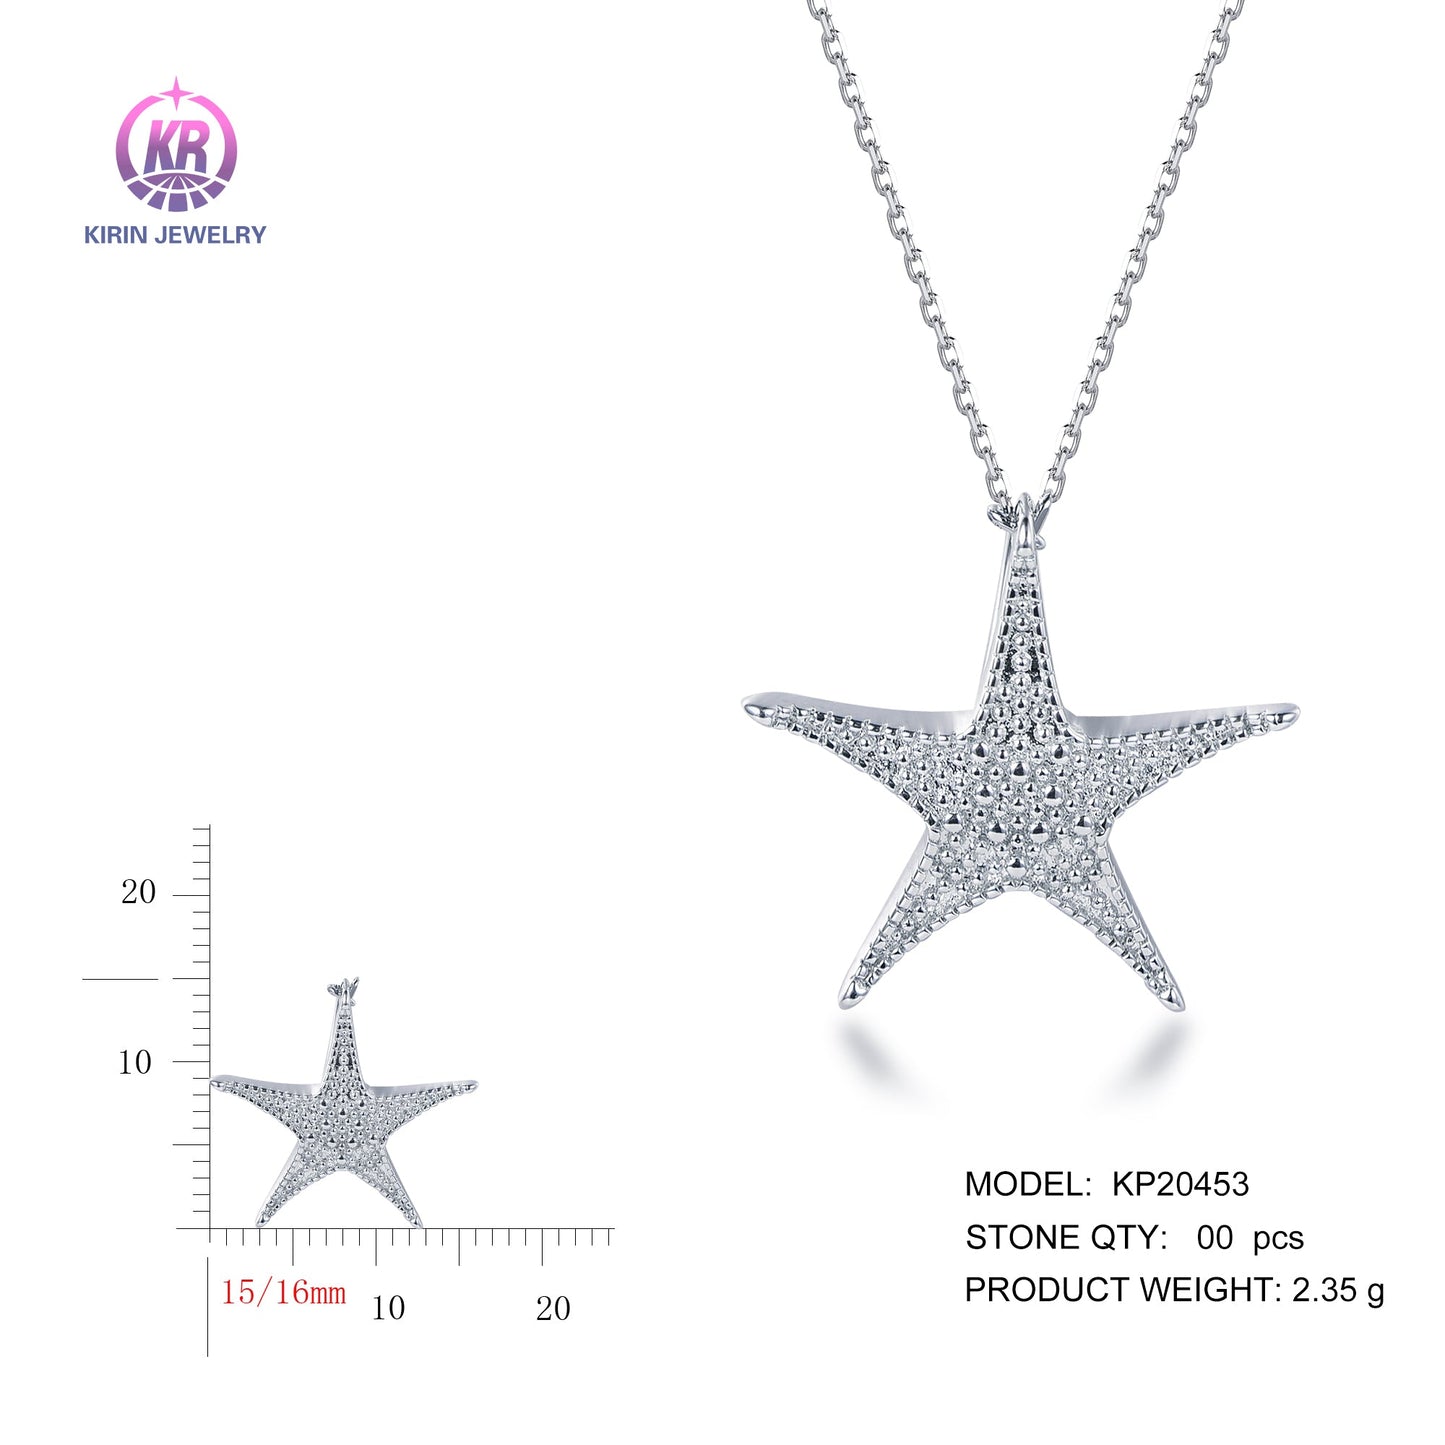 925 silver necklace with rhodium plating KP20453 Kirin Jewelry